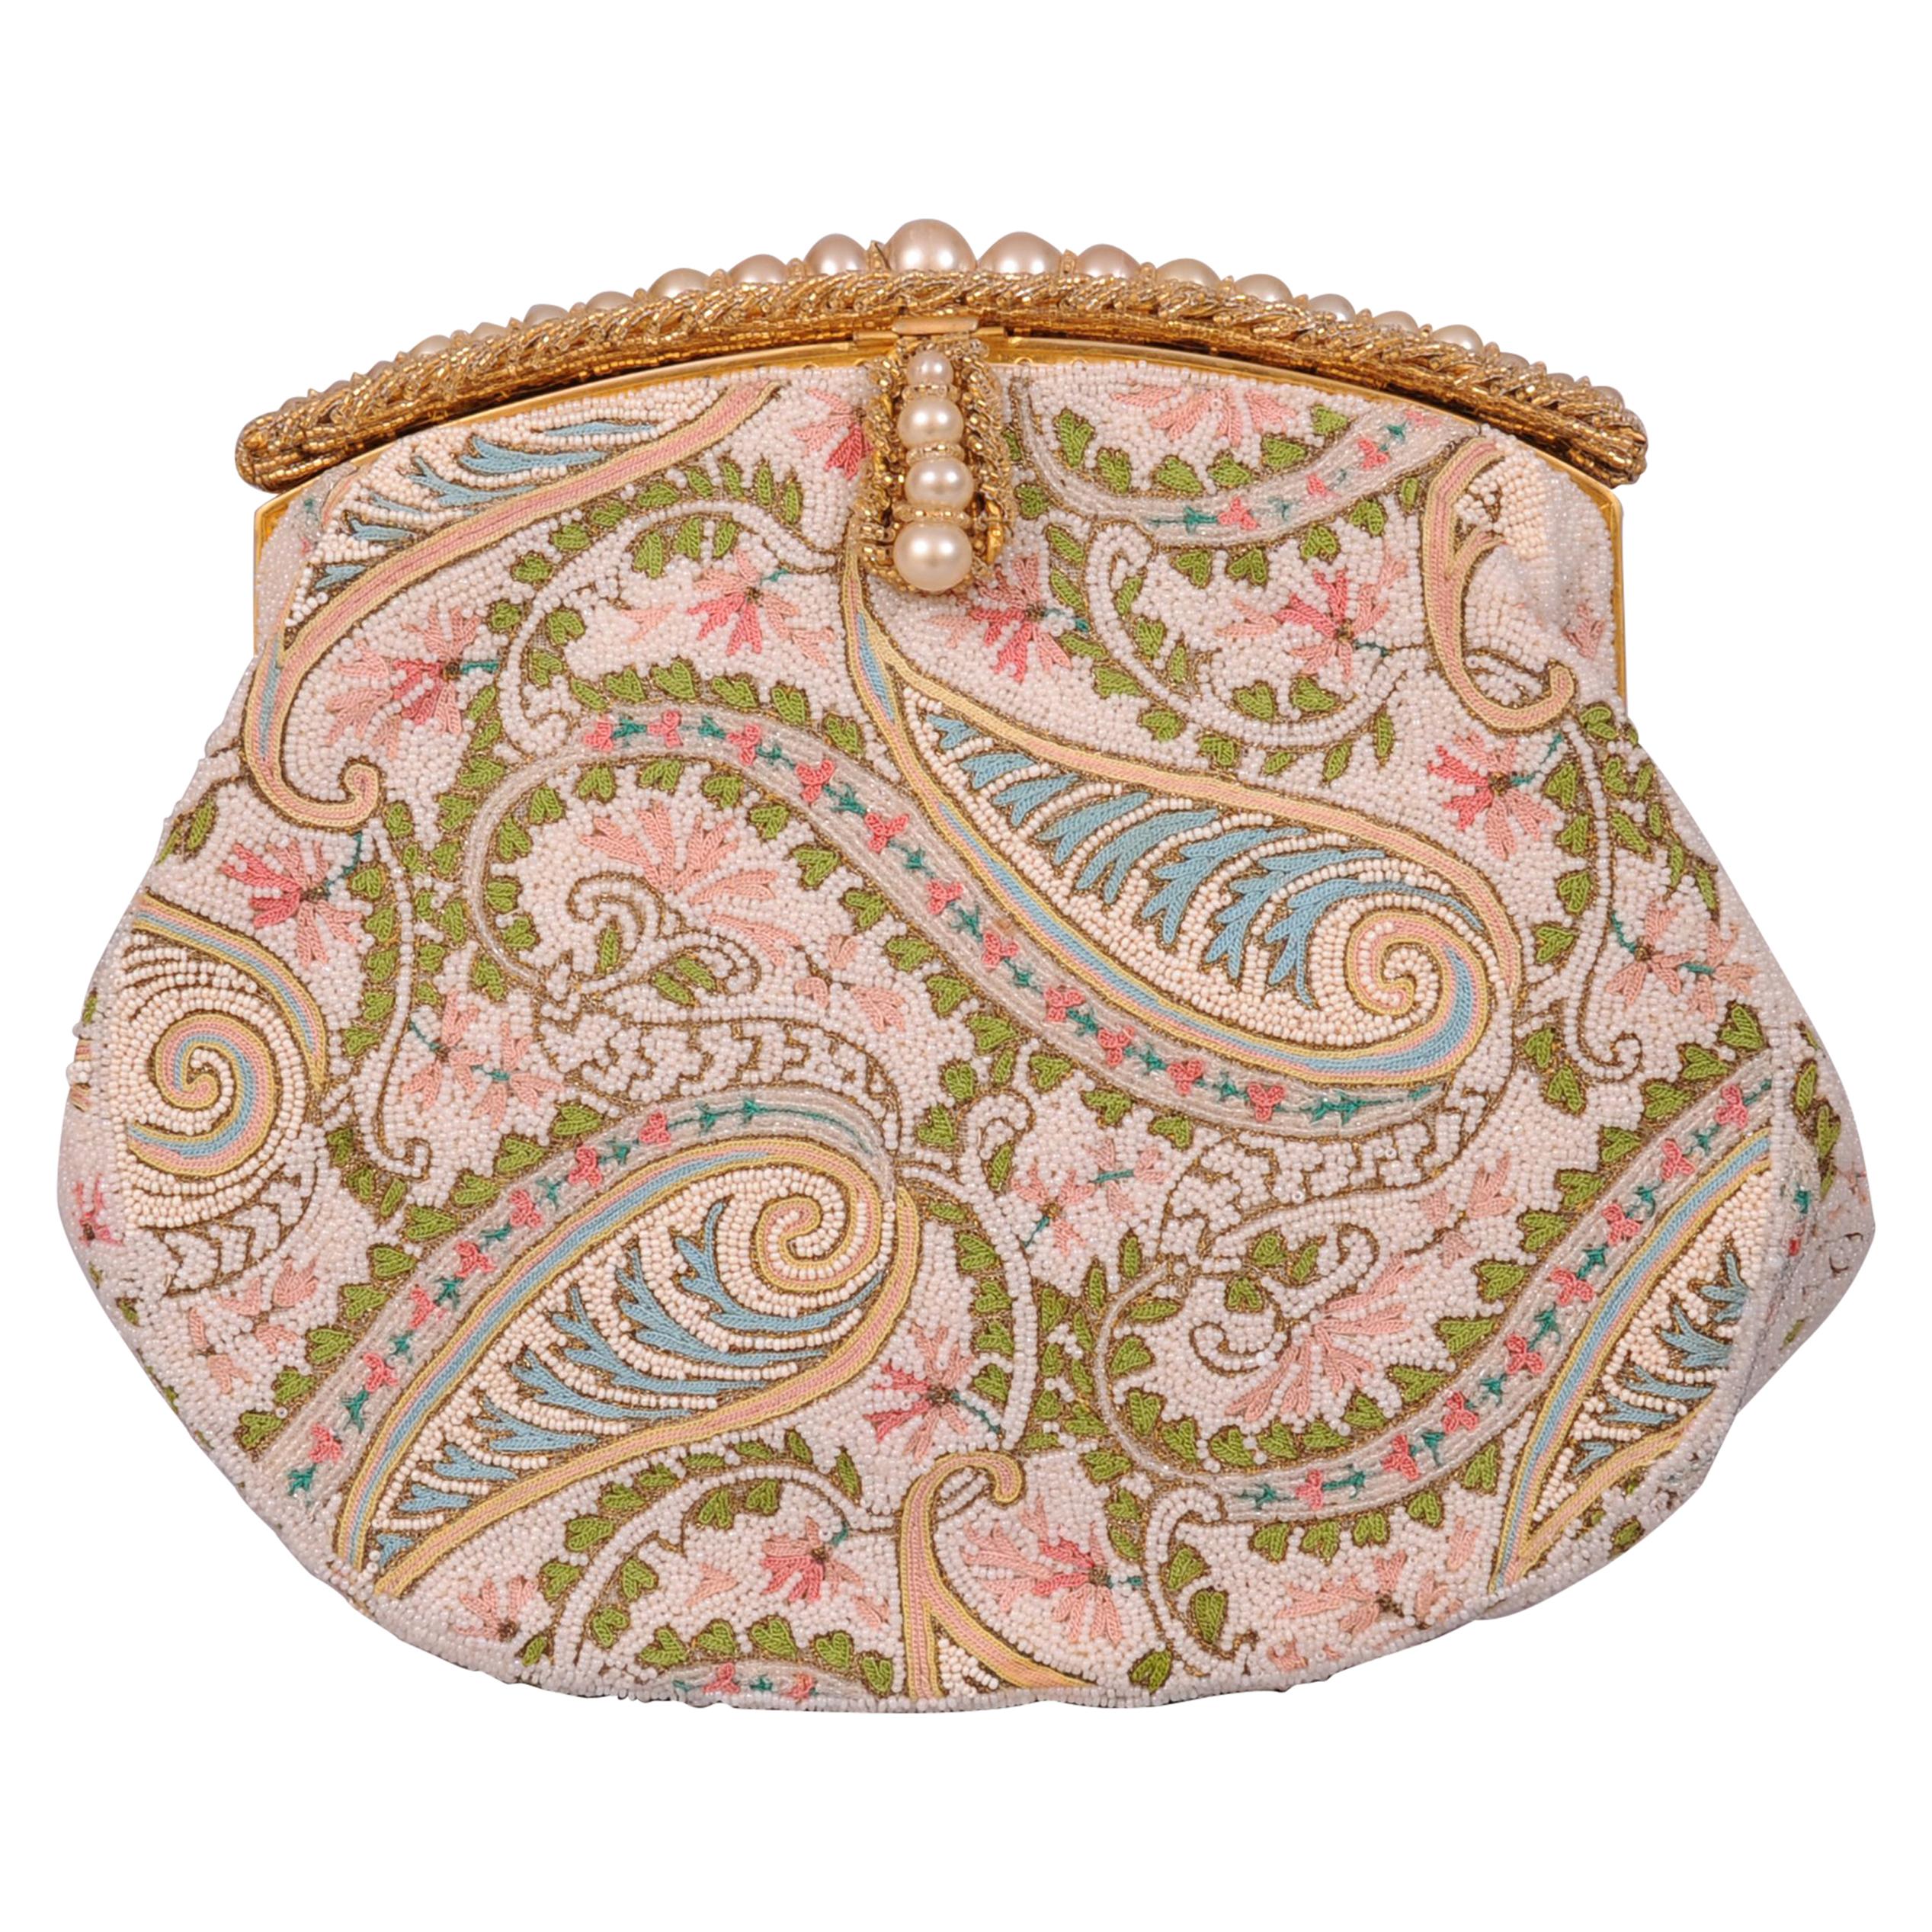 Josef Hand Beaded and Pastel Embroidered French Evening Bag, circa 1960